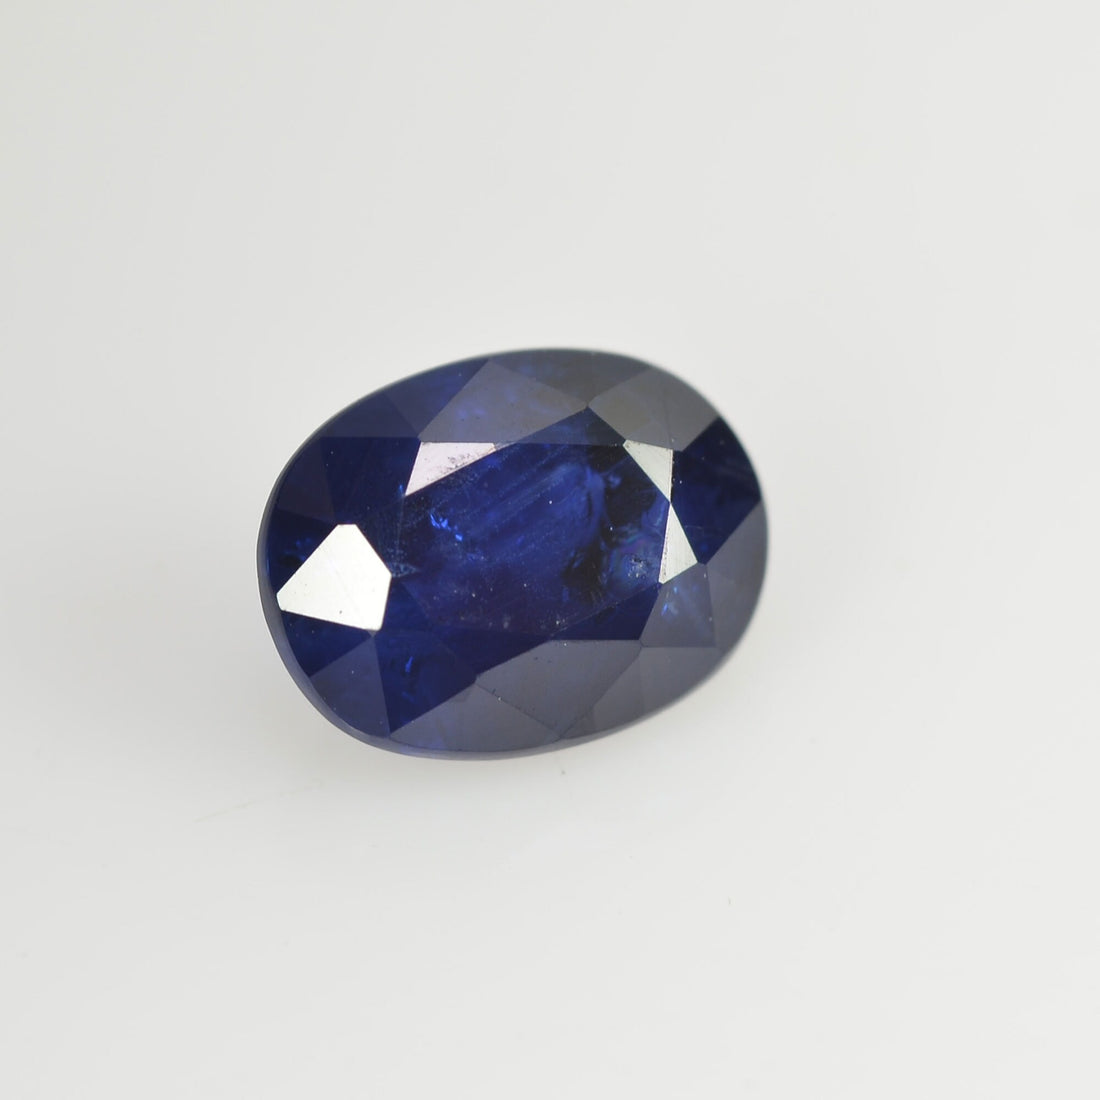 0.94 Cts Natural Blue Sapphire Loose Gemstone Oval Cut